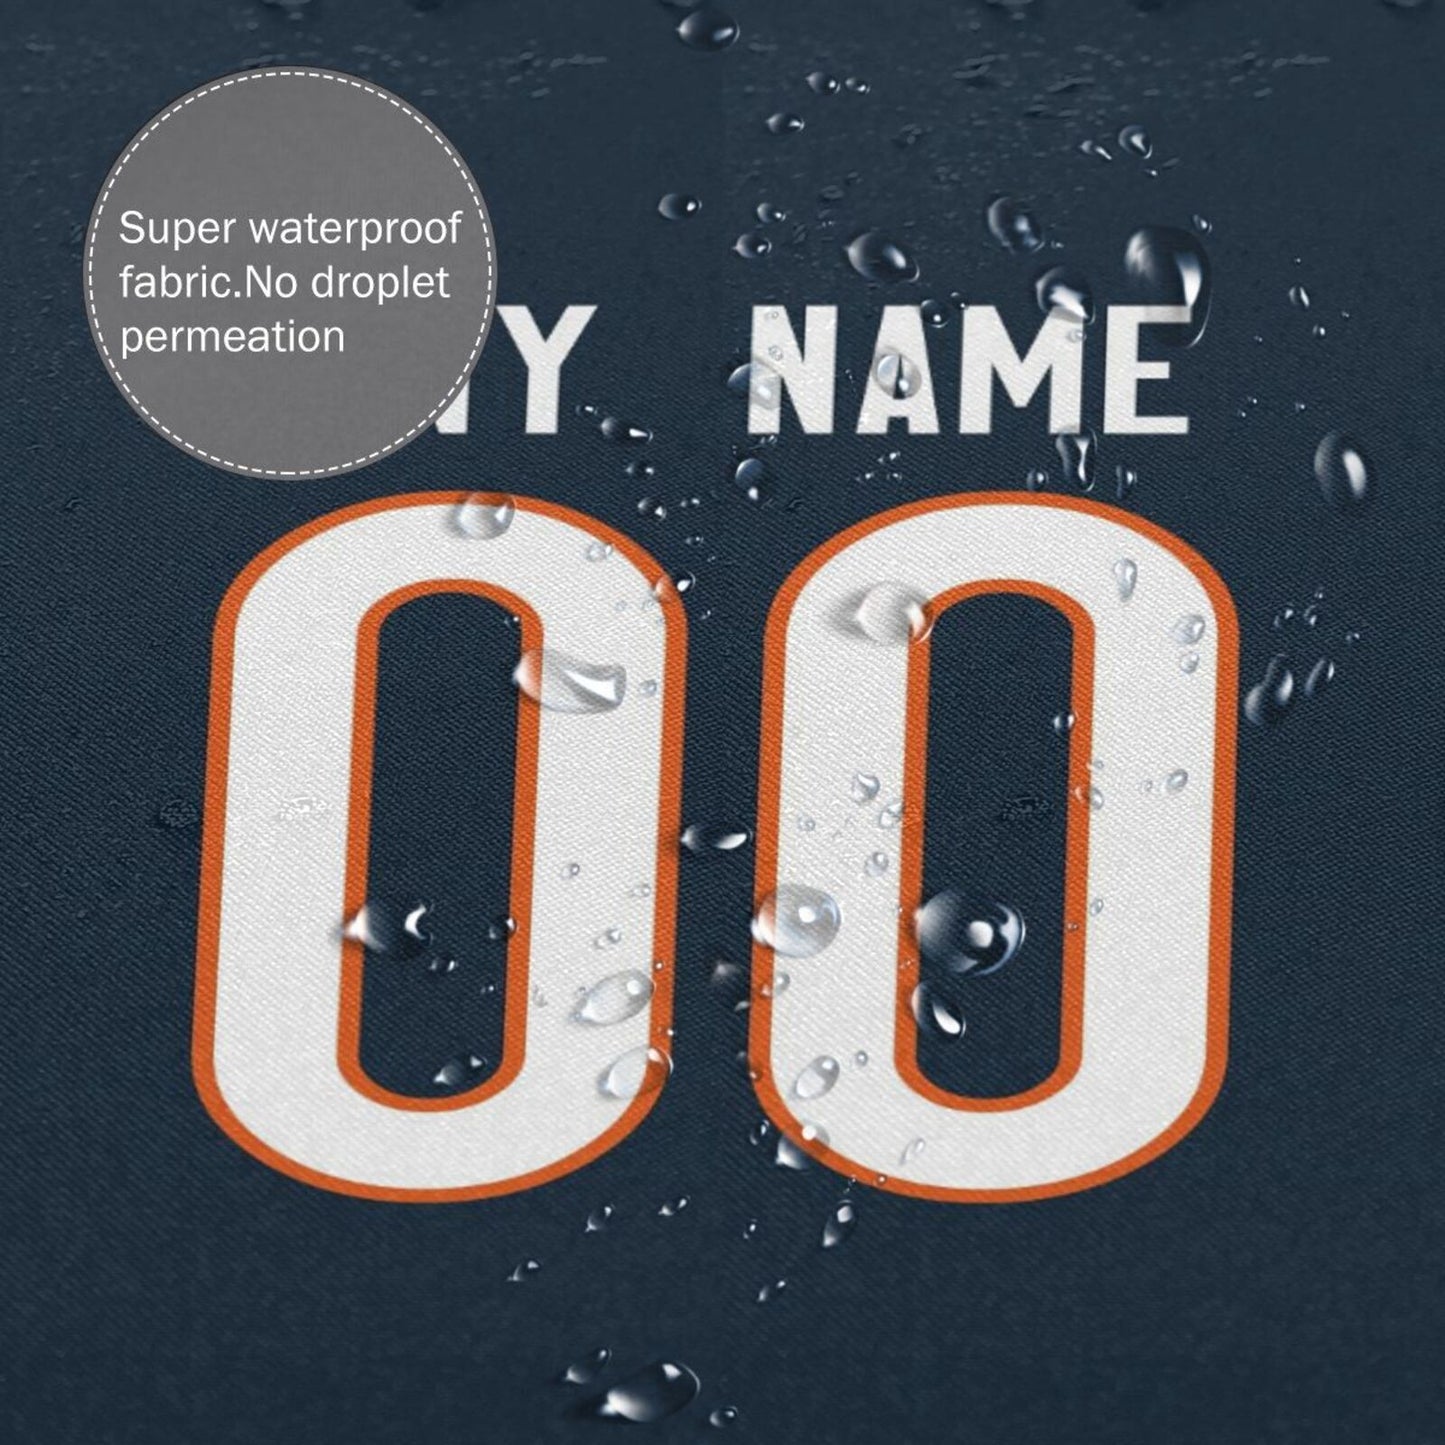 Custom Football Chicago Bears style personalized shower curtain custom design name and number set of 12 shower curtain hooks Rings